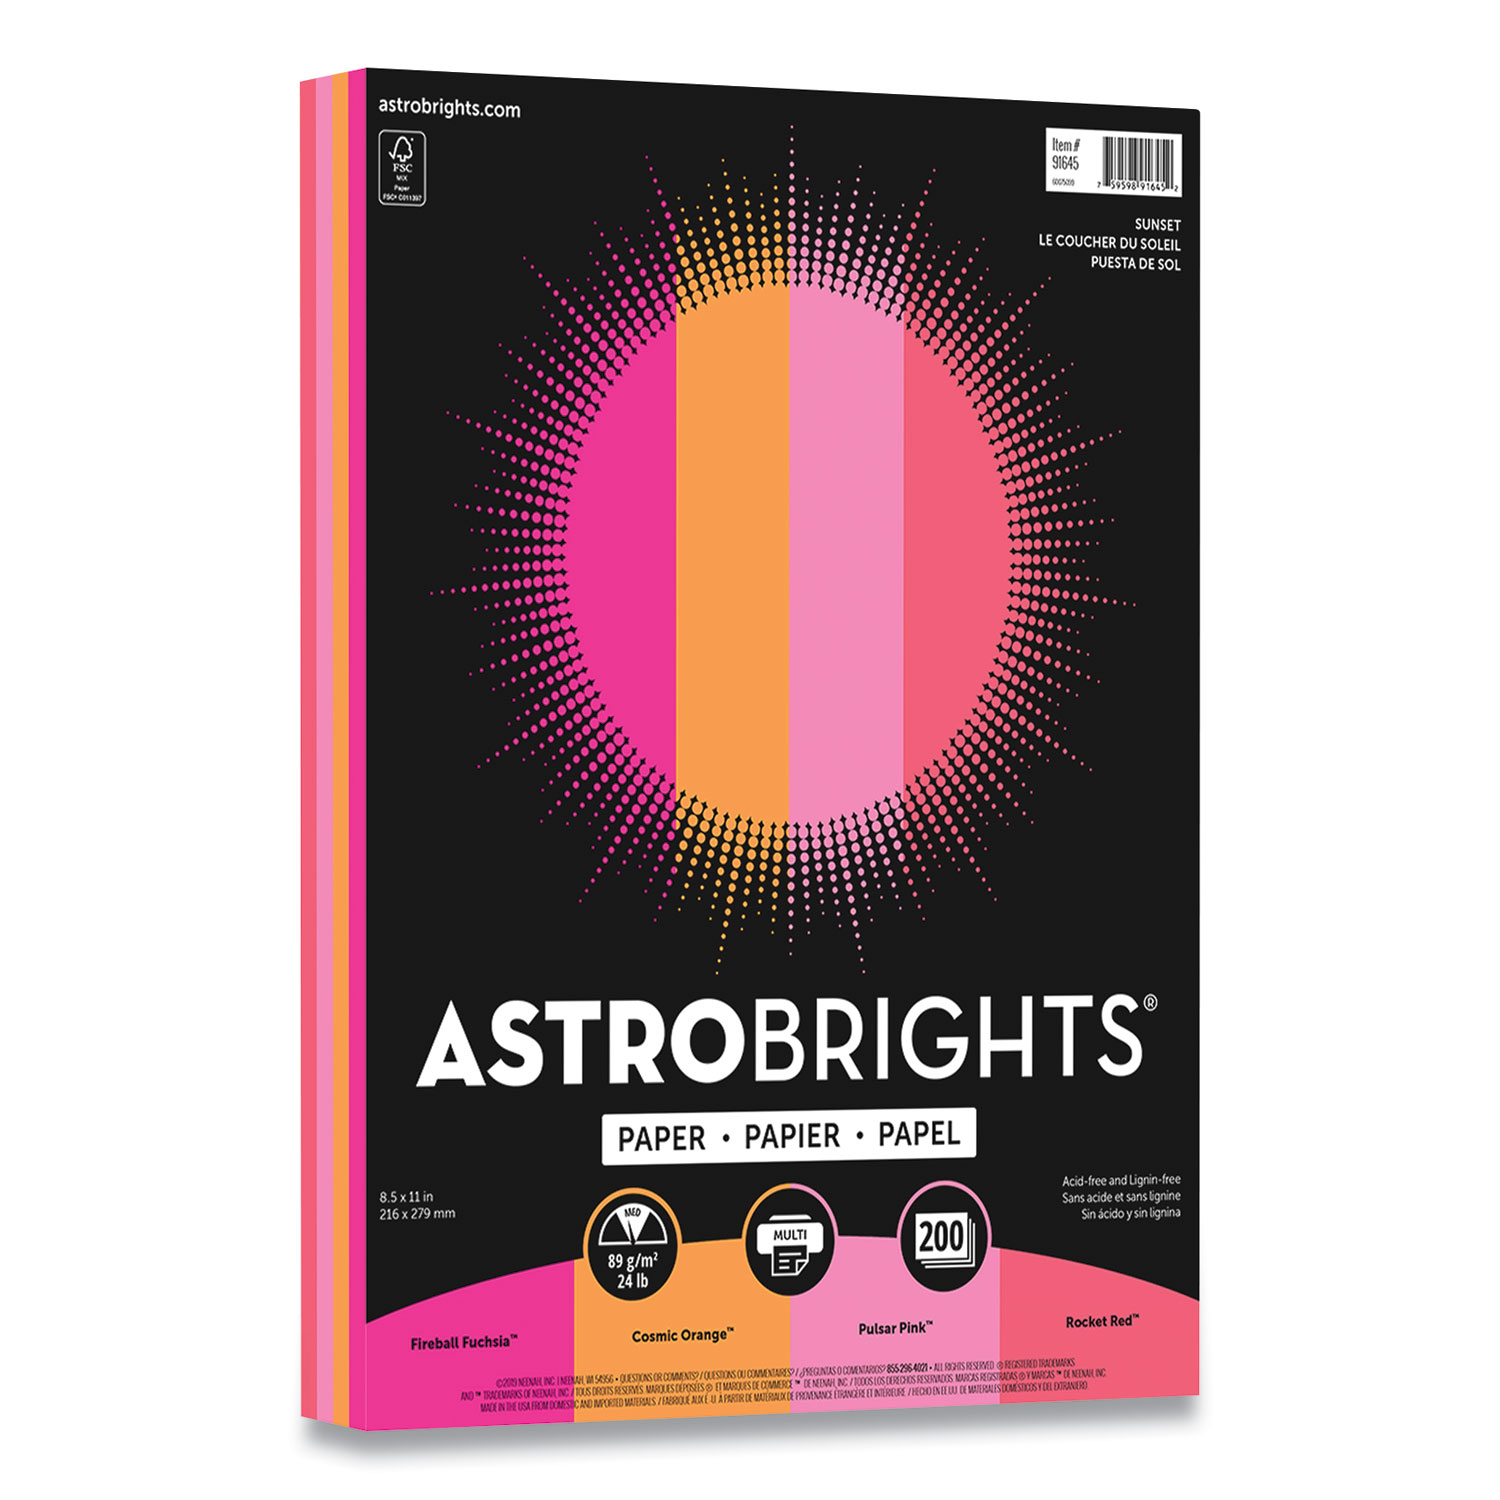  Astrobrights 91645 Color Paper - Sunset Assortment, 24 lb, 8.5 x 11, Assorted Sunset Colors, 200/Pack (WAU24396496) 